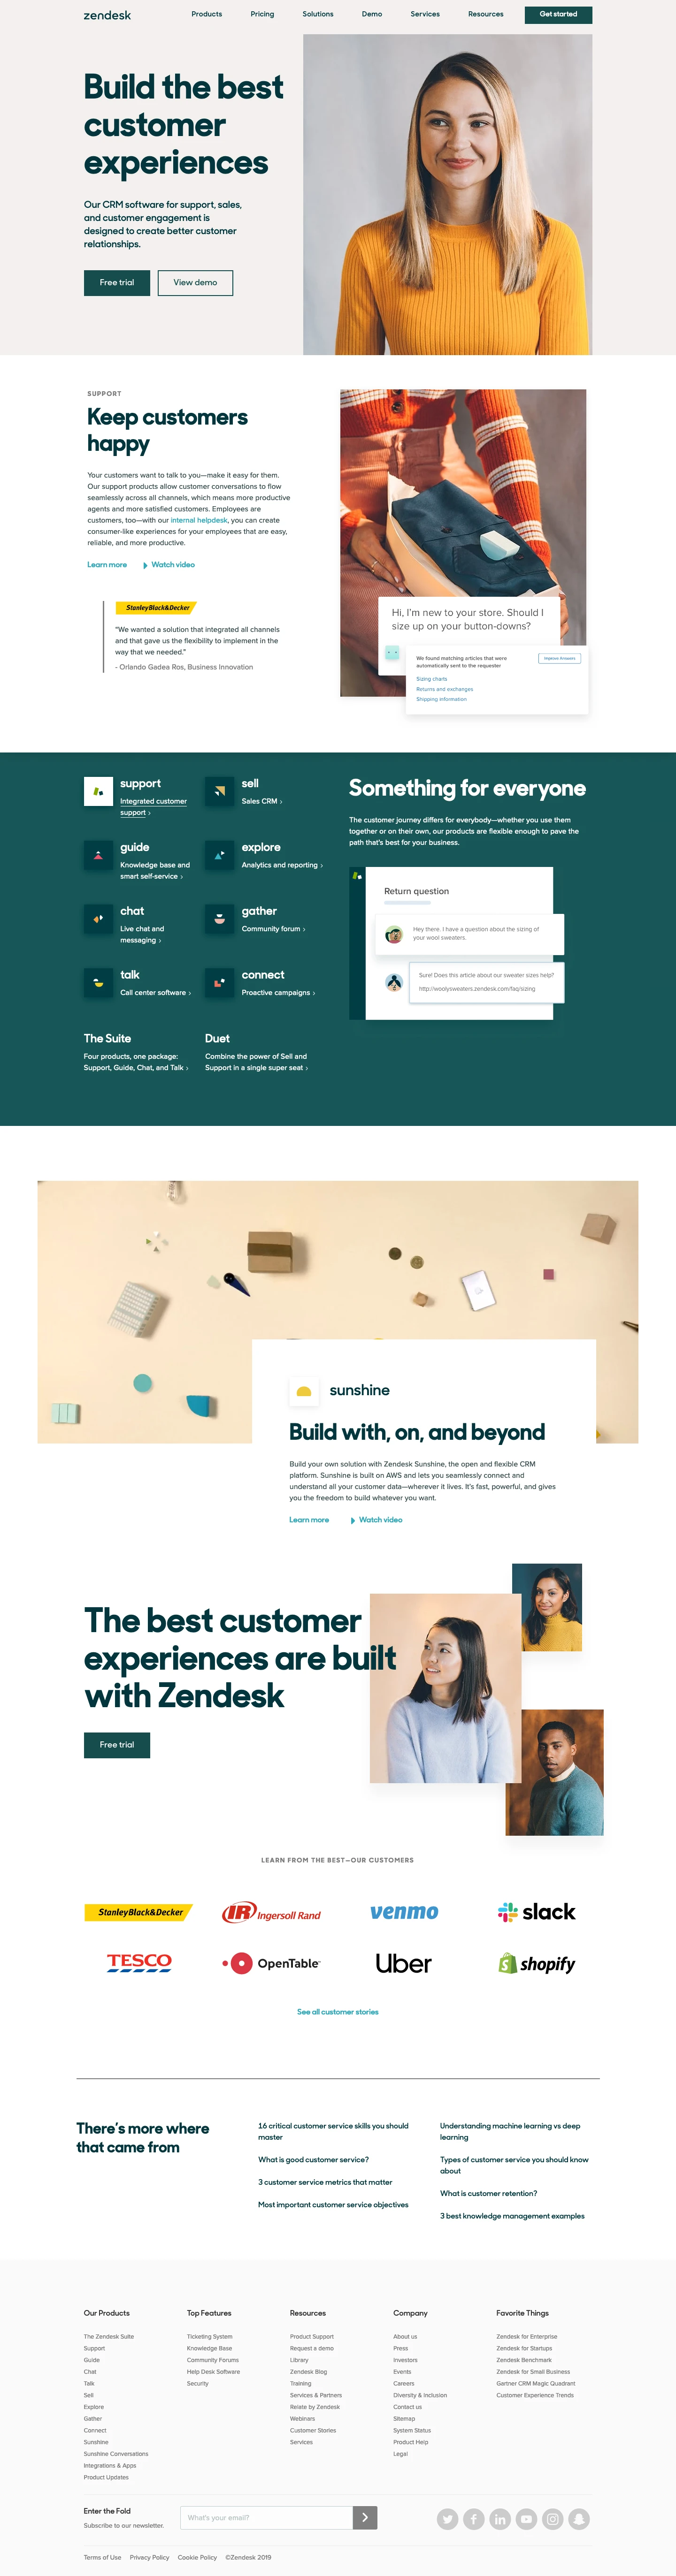 Zendesk Landing Page Example: Build the best customer experiences. Our CRM software for support, sales, and customer engagement is designed to create better customer relationships.